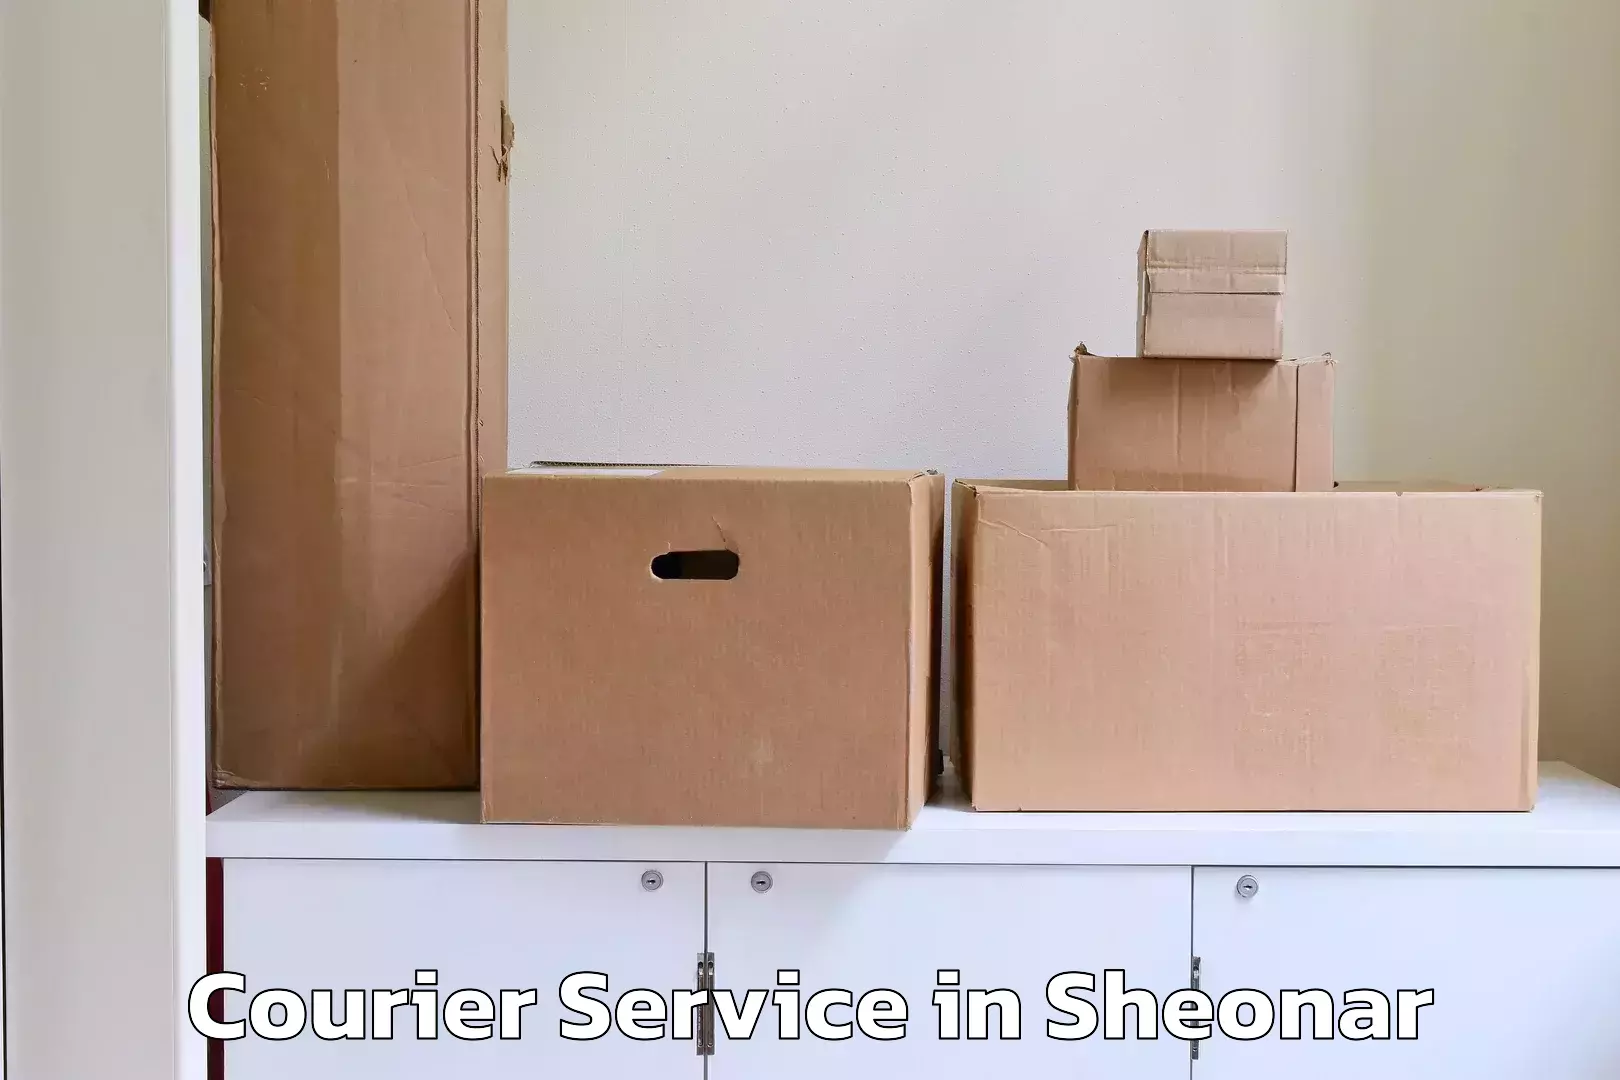 Flexible delivery scheduling in Sheonar